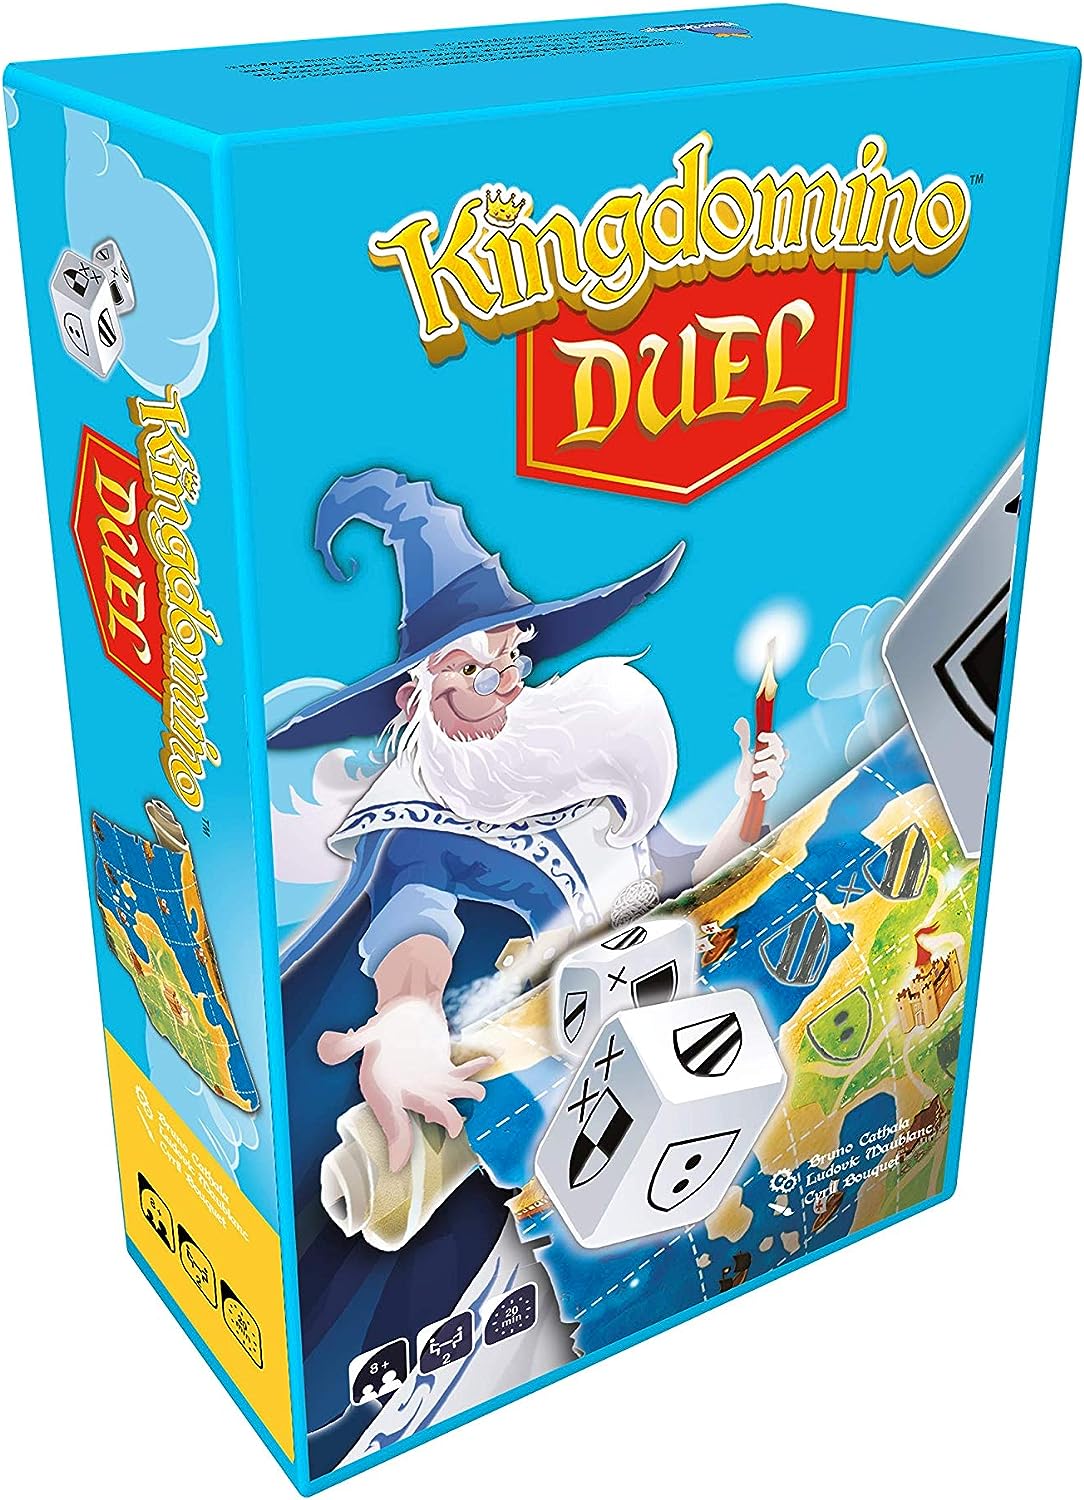 Kingdomino Duel - Roll to control the kingdom! Roll and write game sold by Board Hoarders